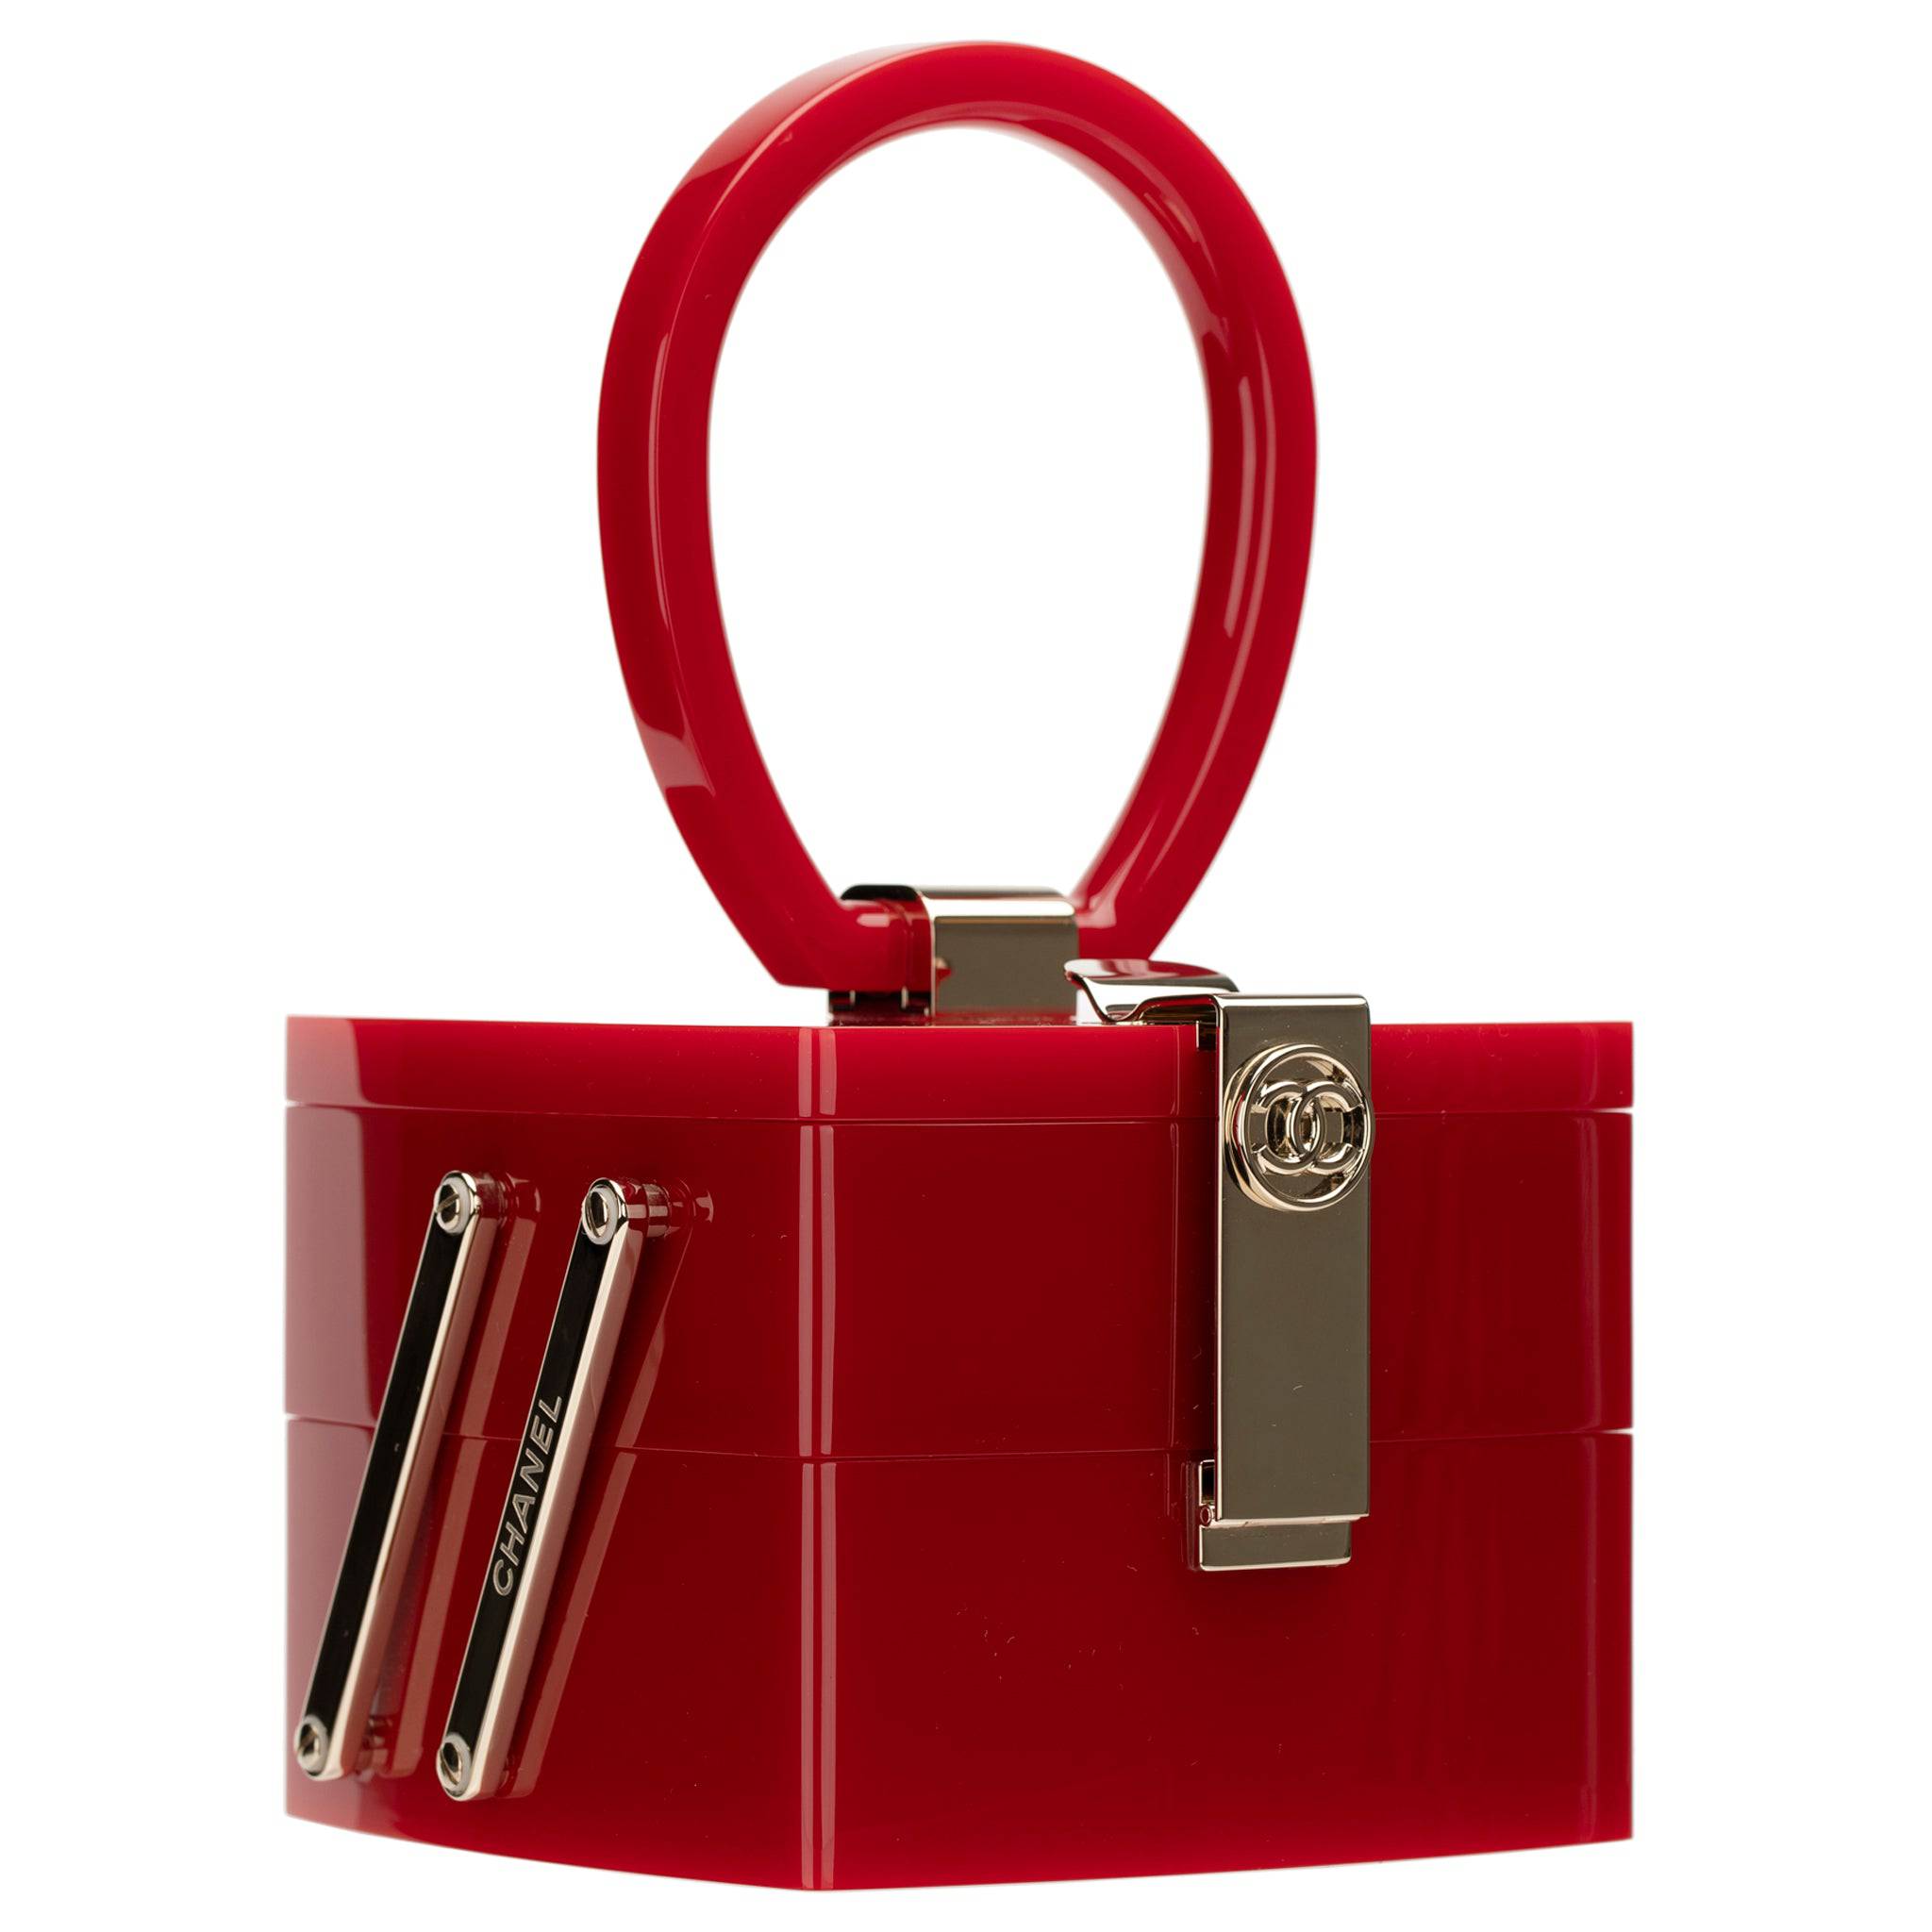 CHANEL MINAUDIÈRE LIMITED EDITION RED LUCITE VANITY CASE WITH MIRROR GOLD-TONE HARDWARE - On Repeat